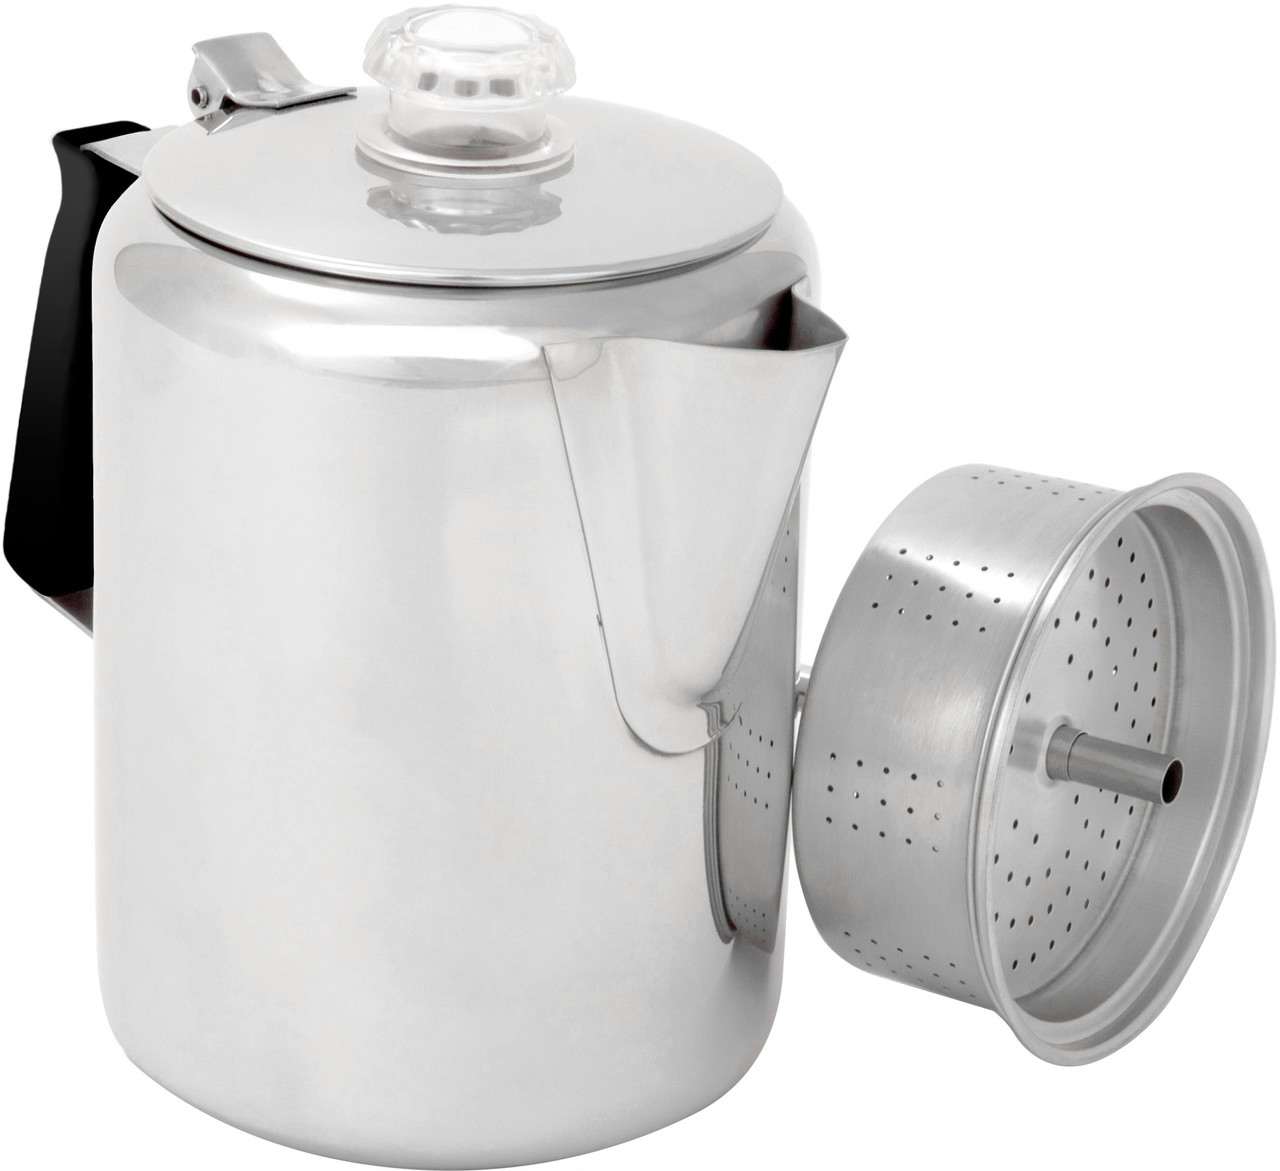 Glacier Stainless Steel 9 Cup Percolator Stainless Steel